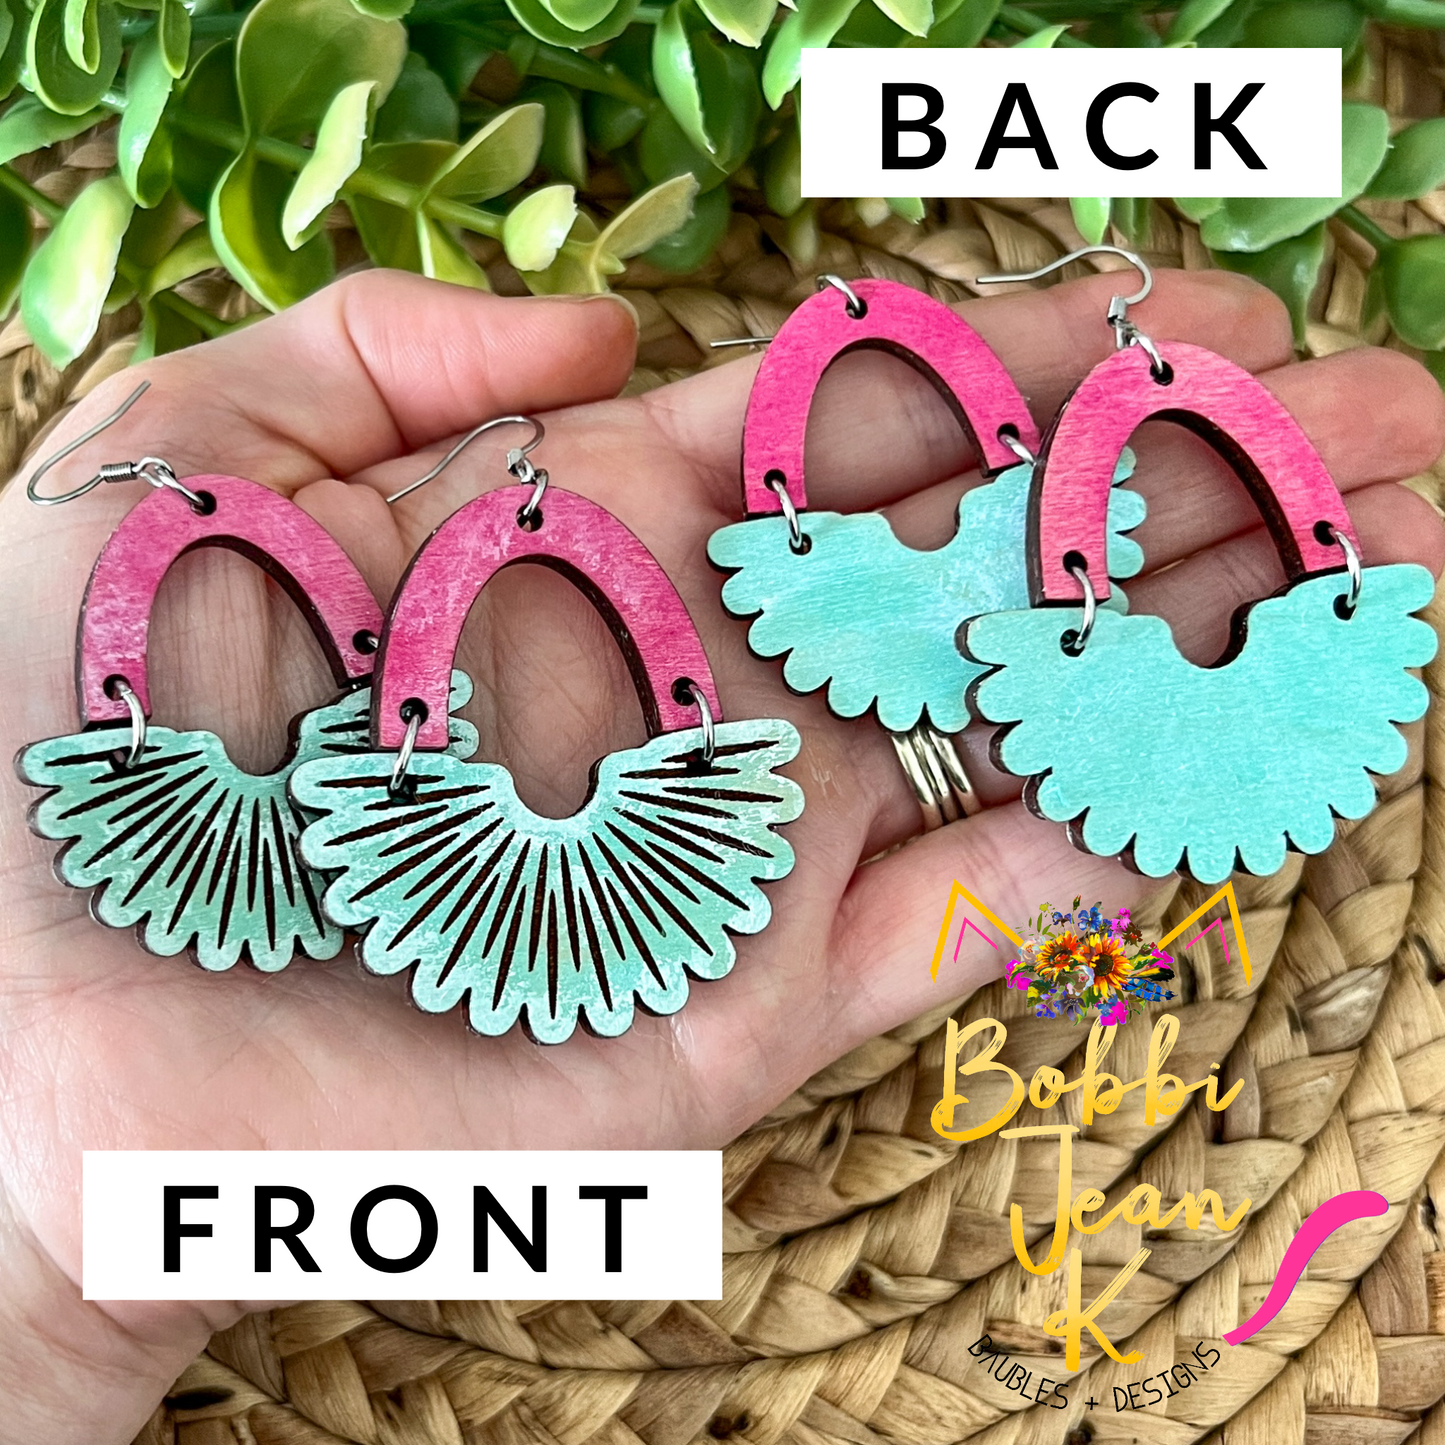 Scalloped Arch Hand Stained Wood Earrings - Double Sided: Choose From 2 Sizes (a July Bestie Box Pair)